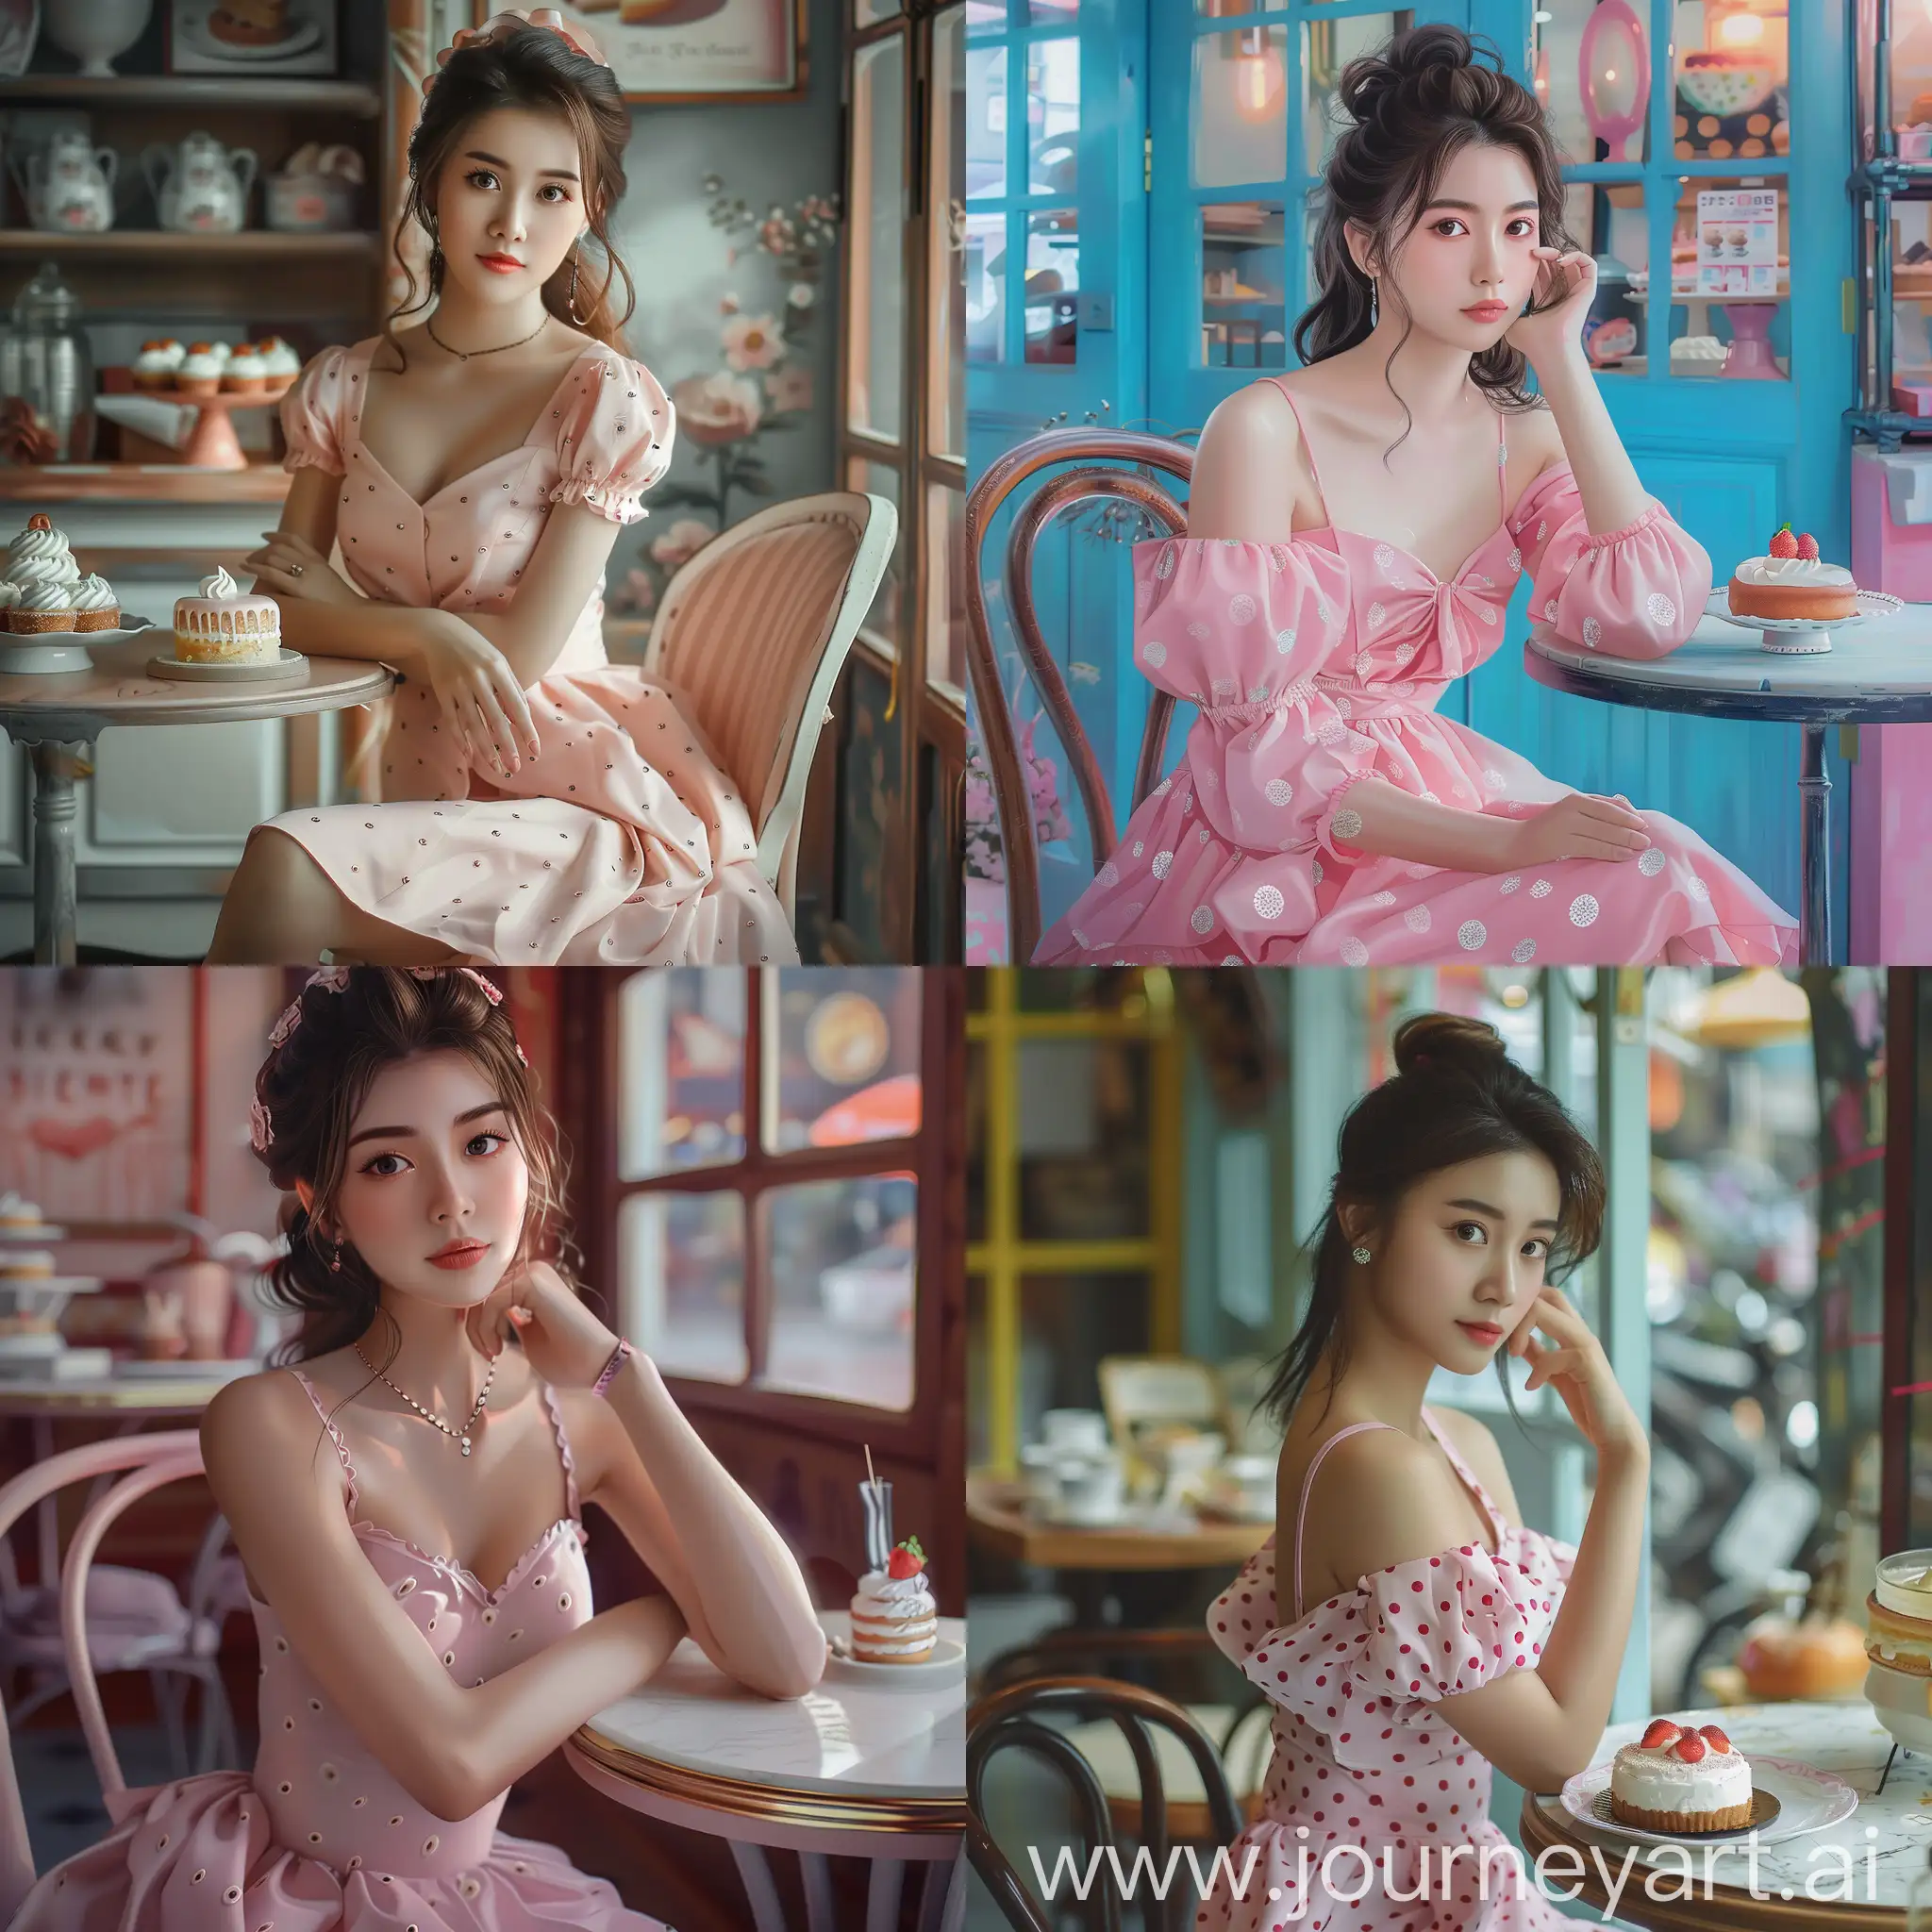 Young-Thai-Woman-in-Pink-Polka-Dot-Dress-at-Cozy-Bakery